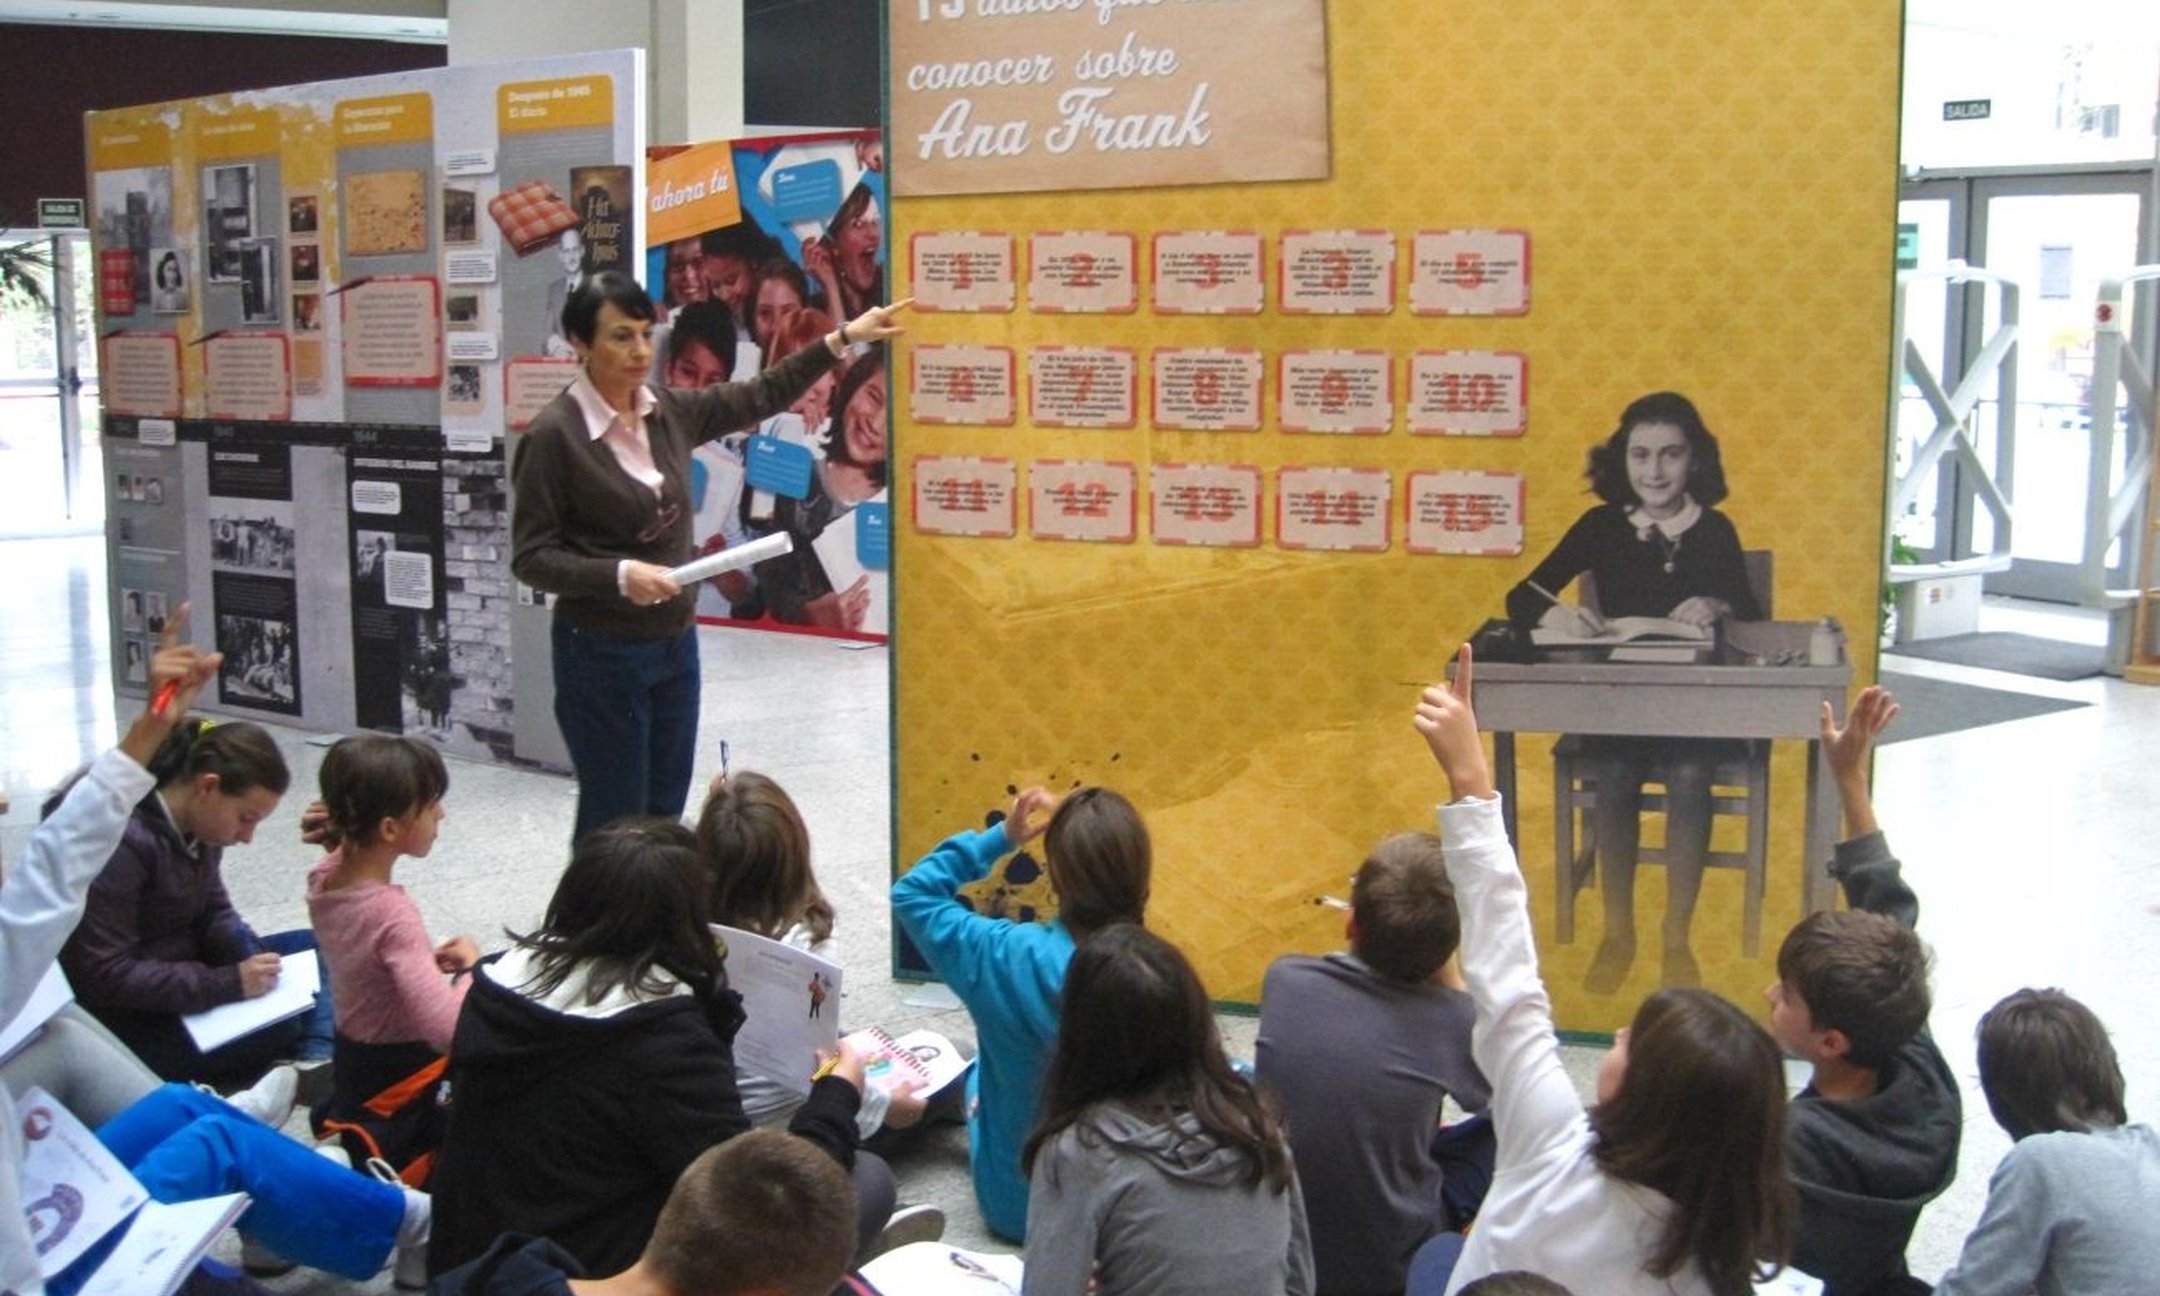 Students visiting the exhibition "Reading and Writing with Anne Frank" at the public library of Villaverde (Community of Madrid) (November 2014)